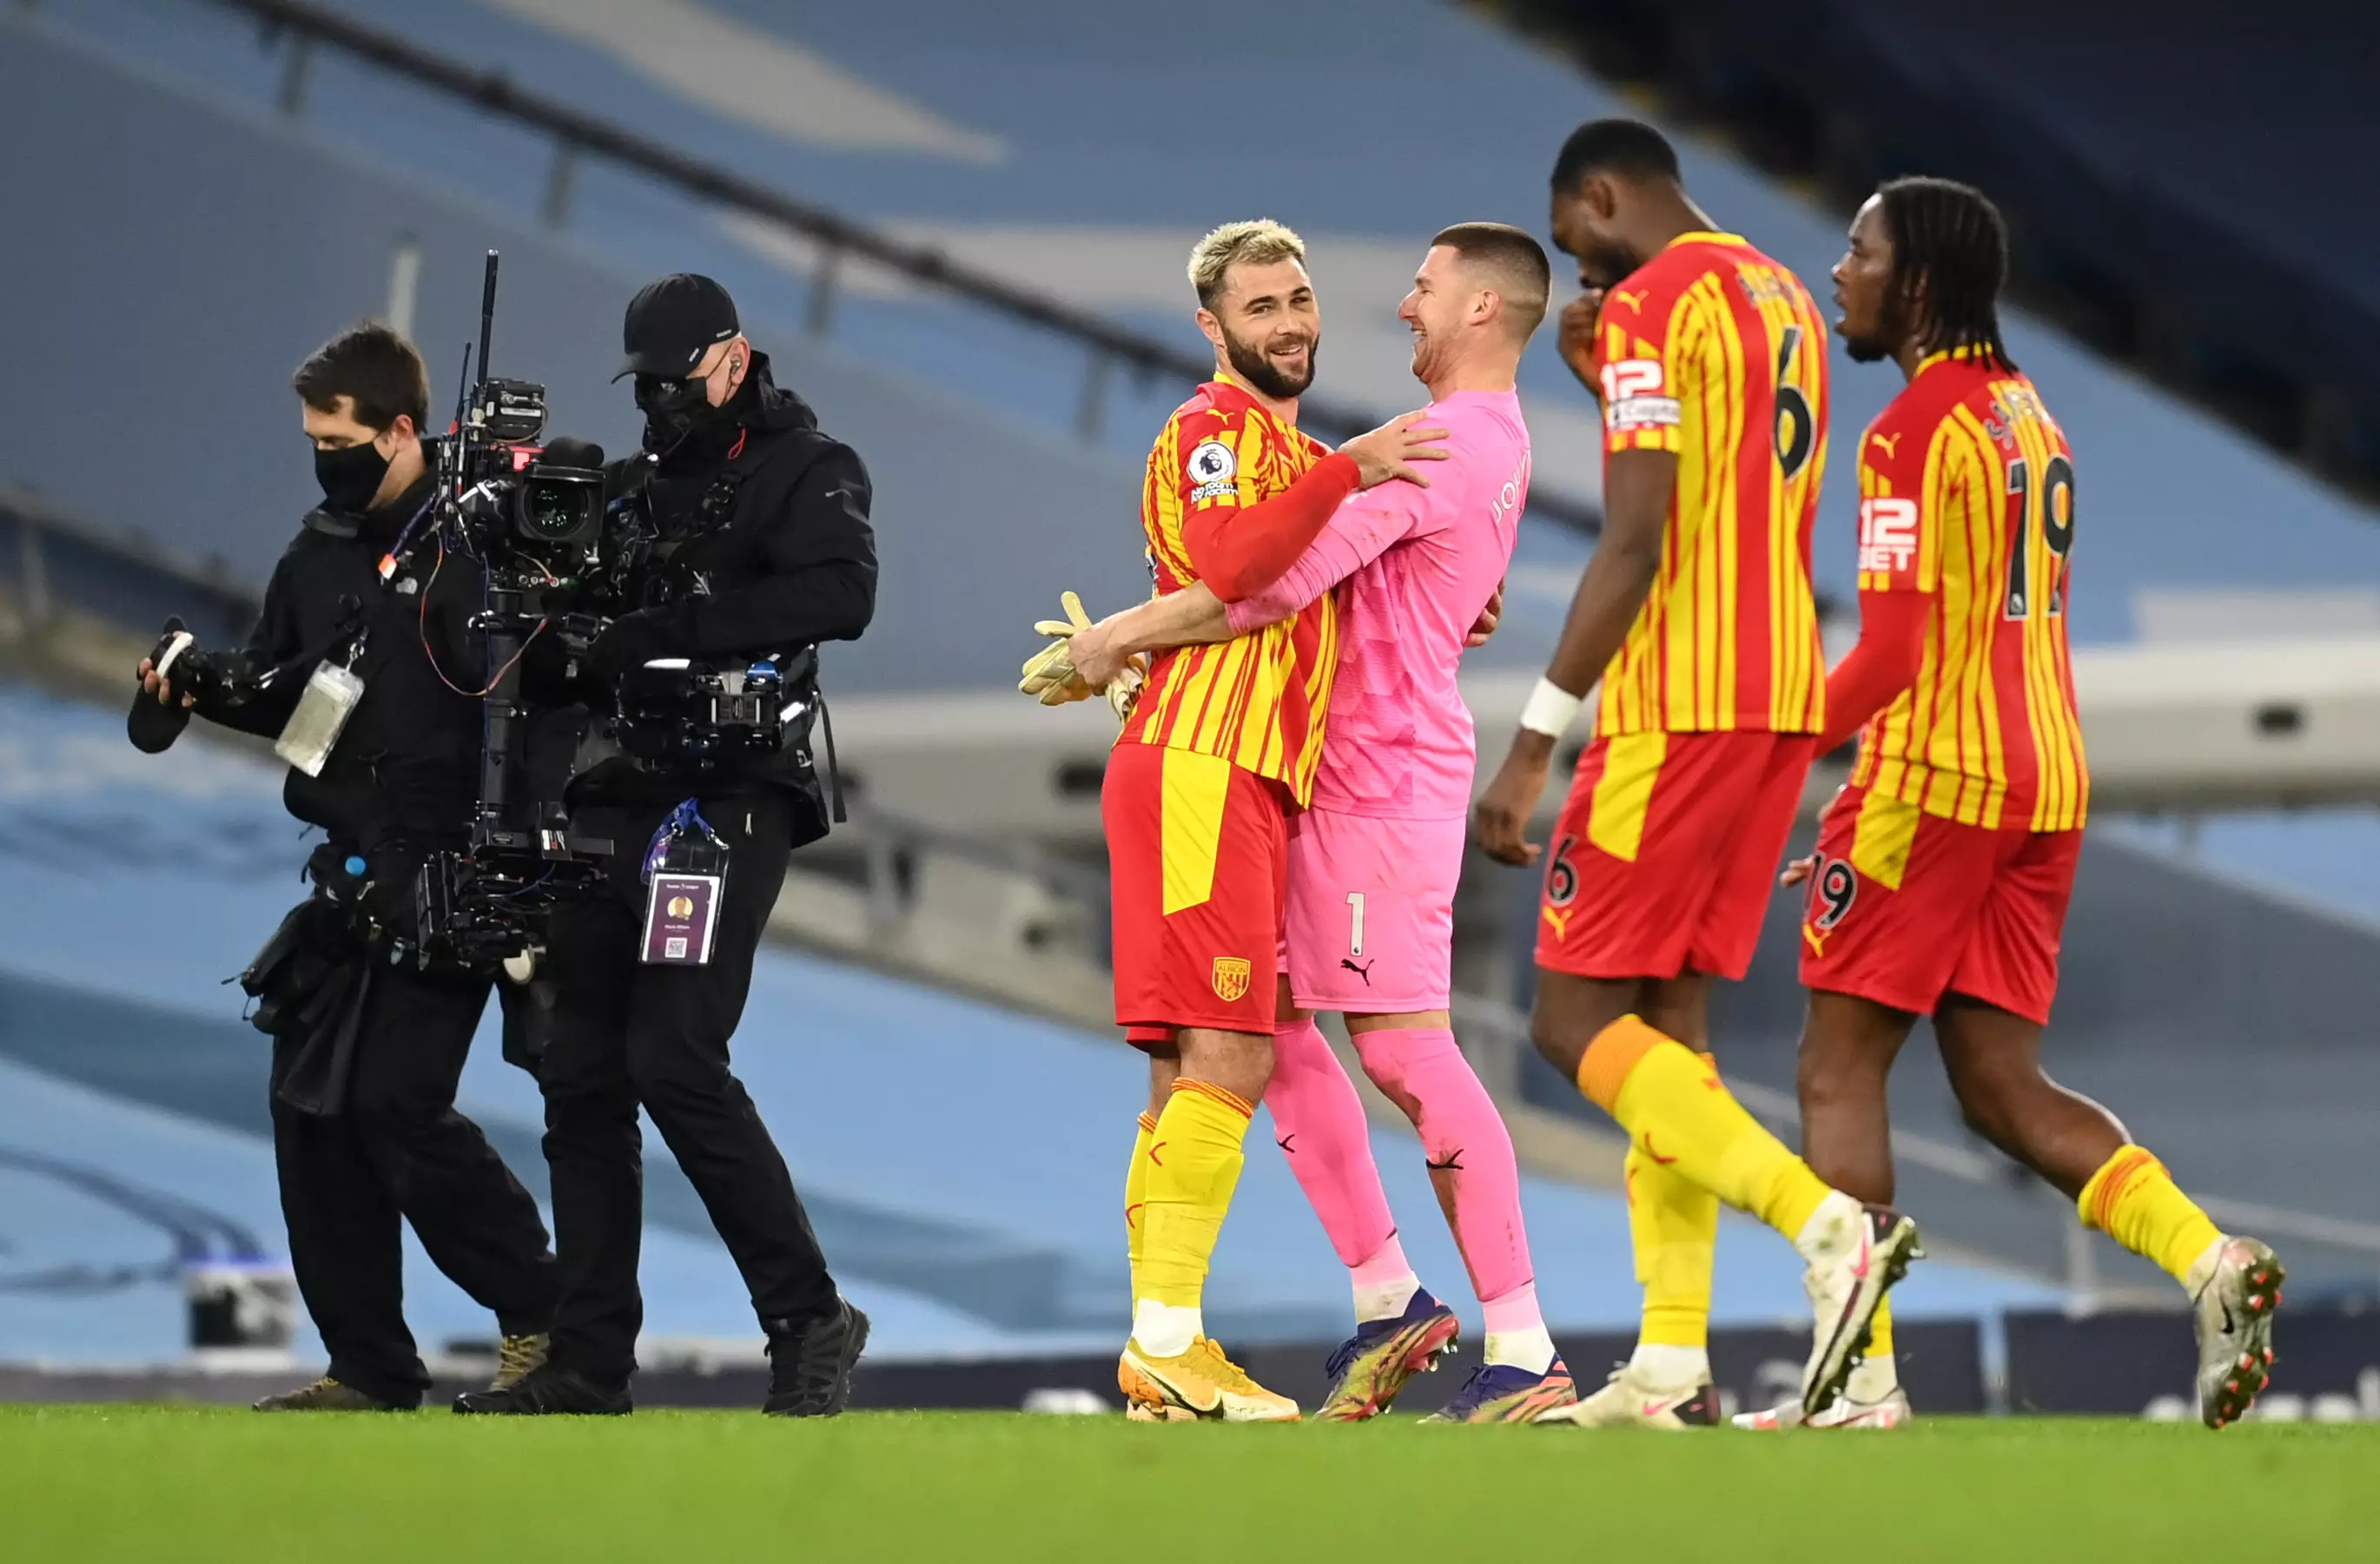 West Brom players celebrate their draw with City. Image: PA Images